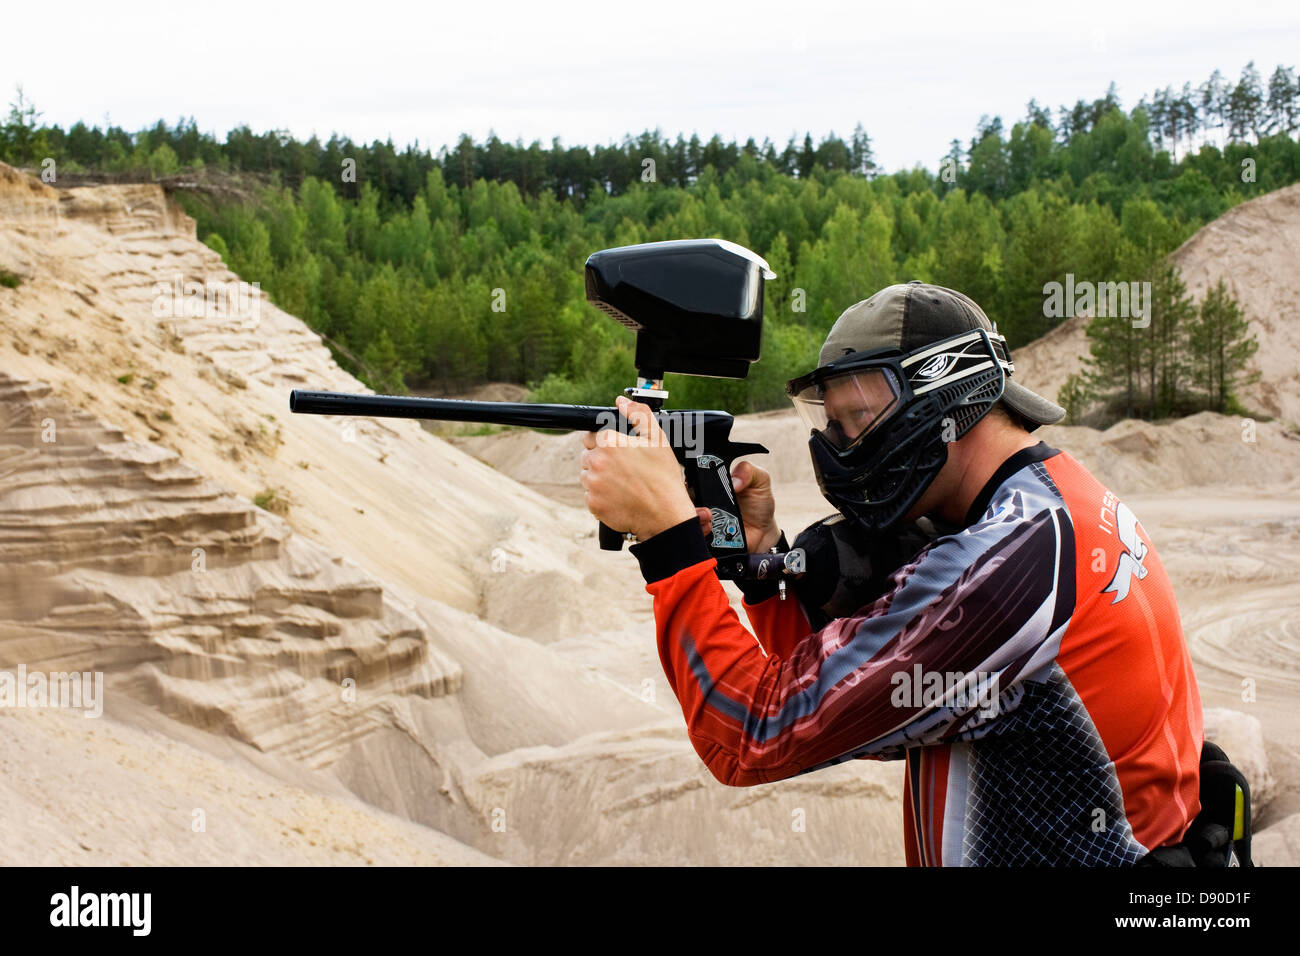 Men playing paintball, Sweden. Stock Photo